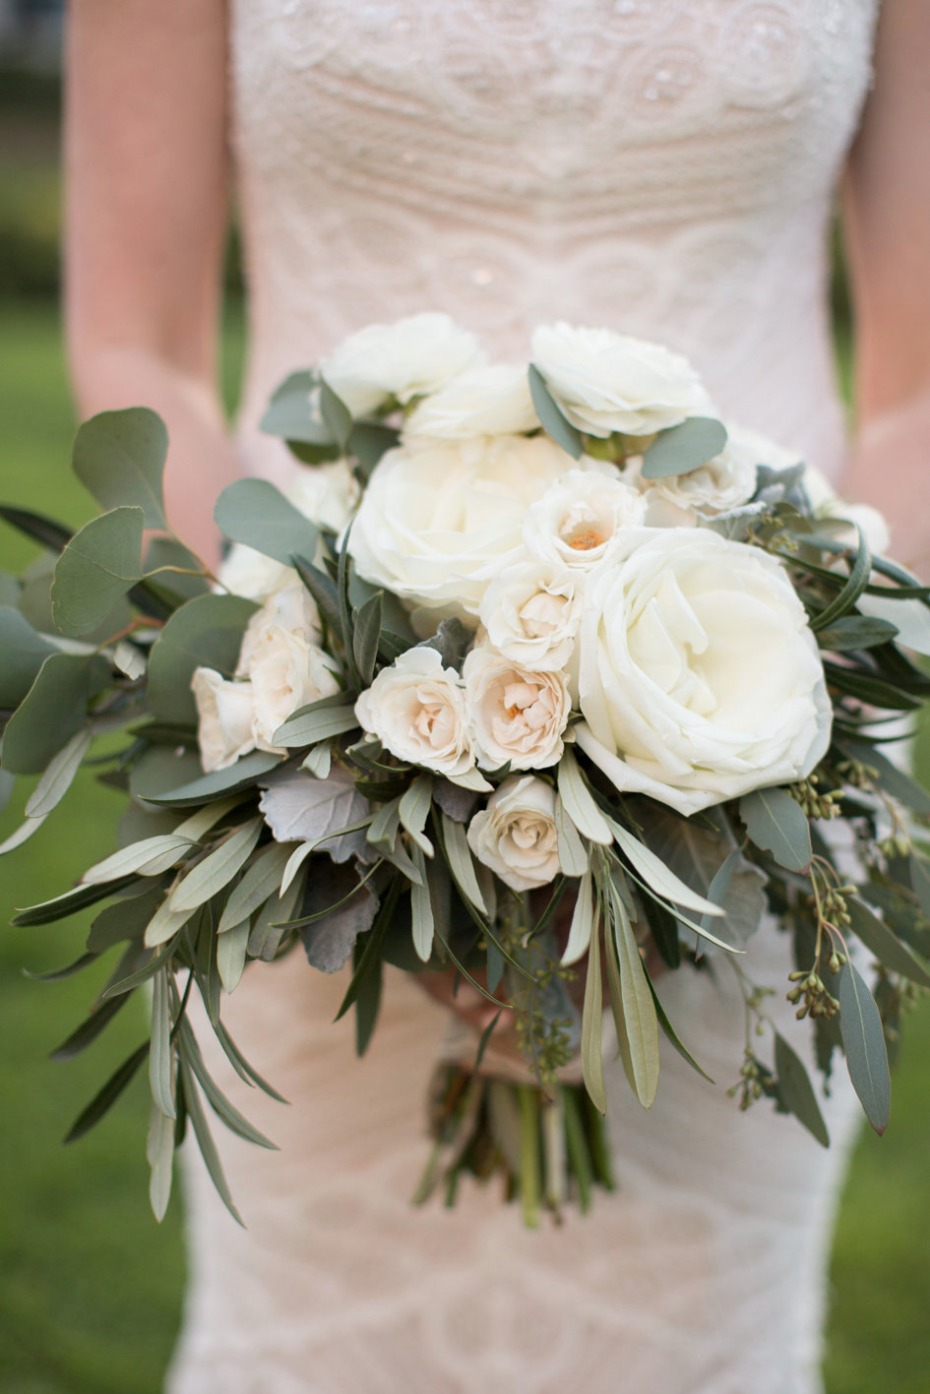 Elegant white and green bouquet